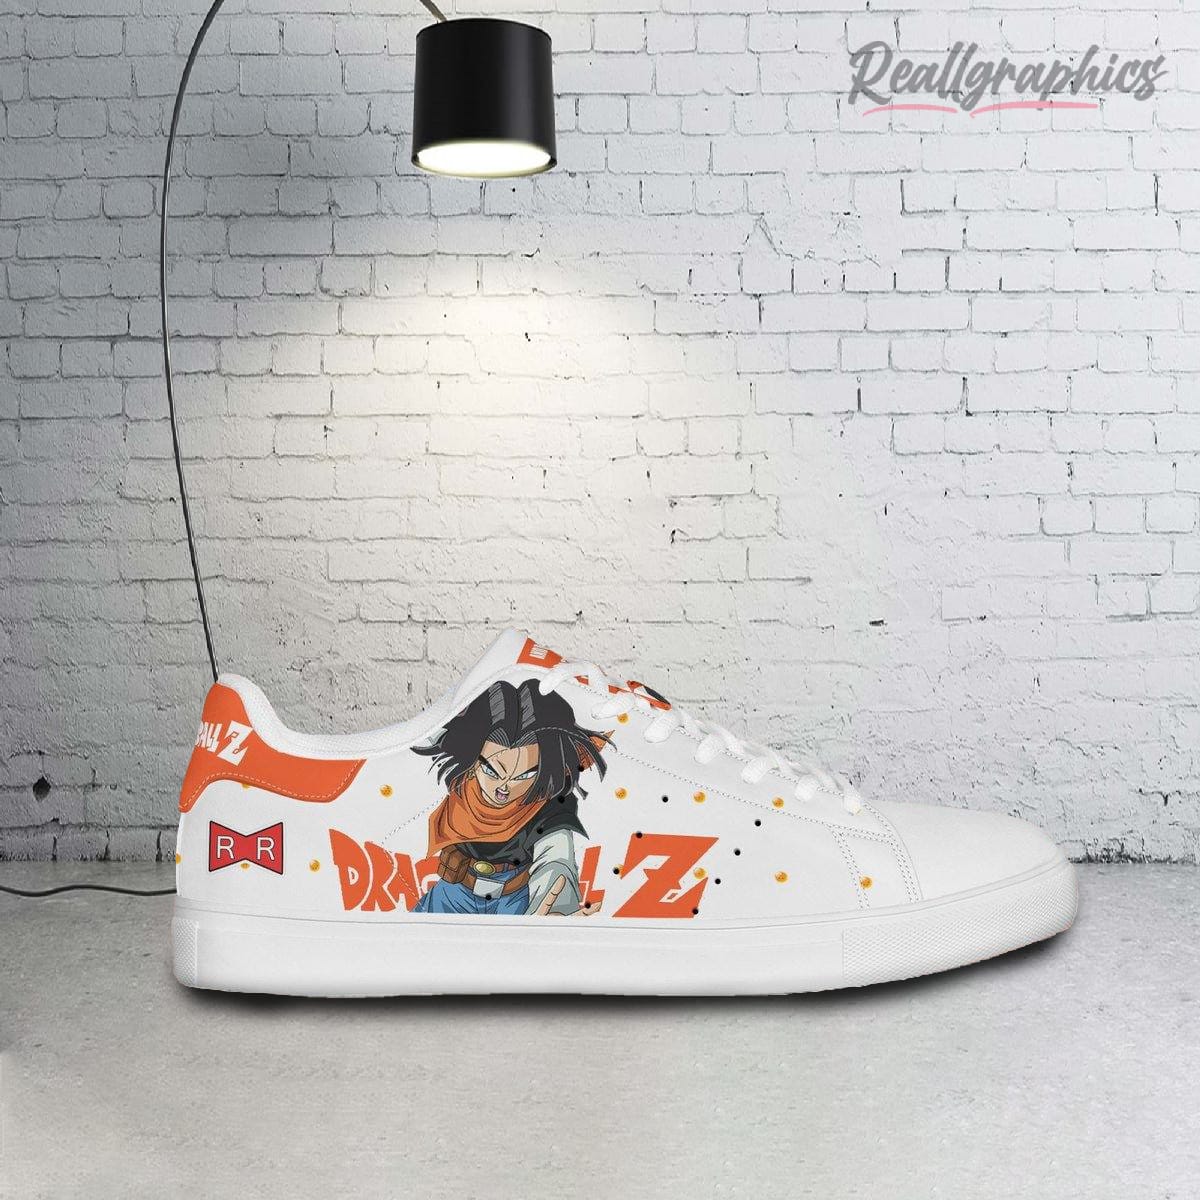 dragon ball android 17 stan smith shoes custom anime sneakers 2 cetm1u